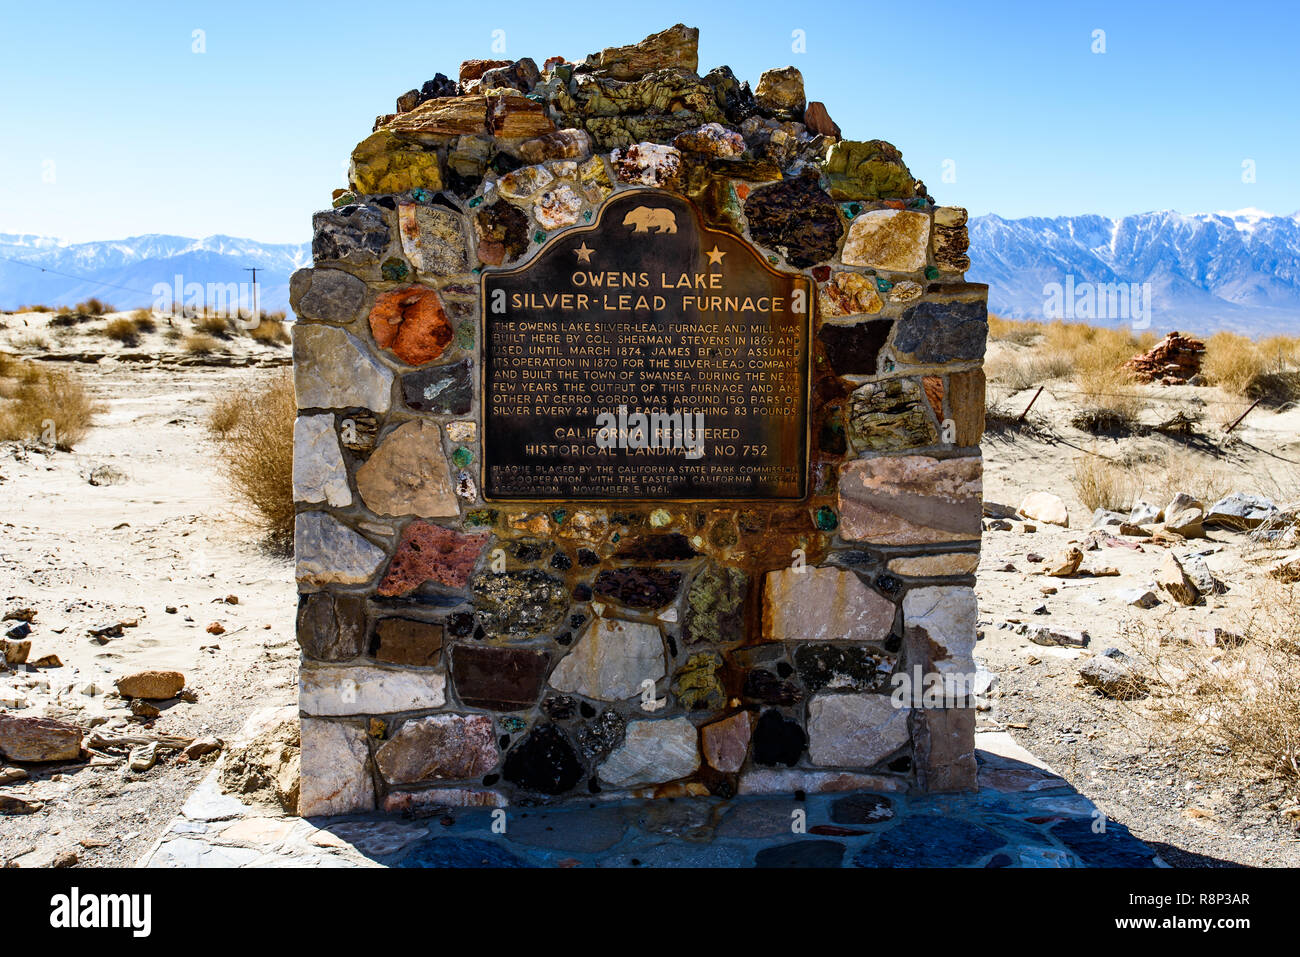 historical monument at the site of the silver lead furnace in the former boomtown, now ghost town, of Swansea, California. Stock Photo